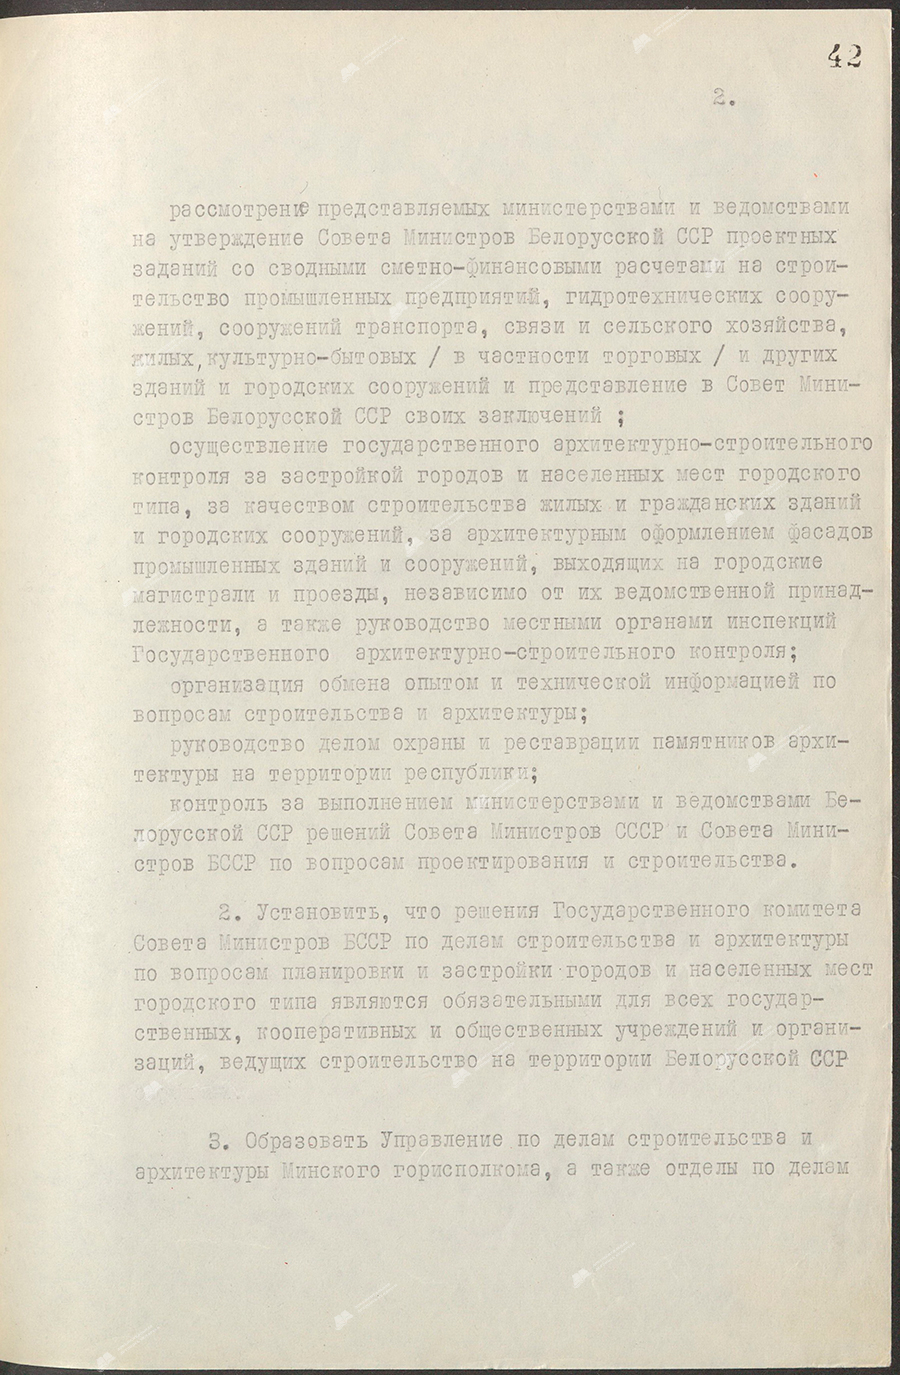 Resolution No. 544 of the Council of Ministers of the Byelorussian SSR «On the formation of the State Committee of the Council of Ministers of the BSSR for Construction and Architecture»-с. 1